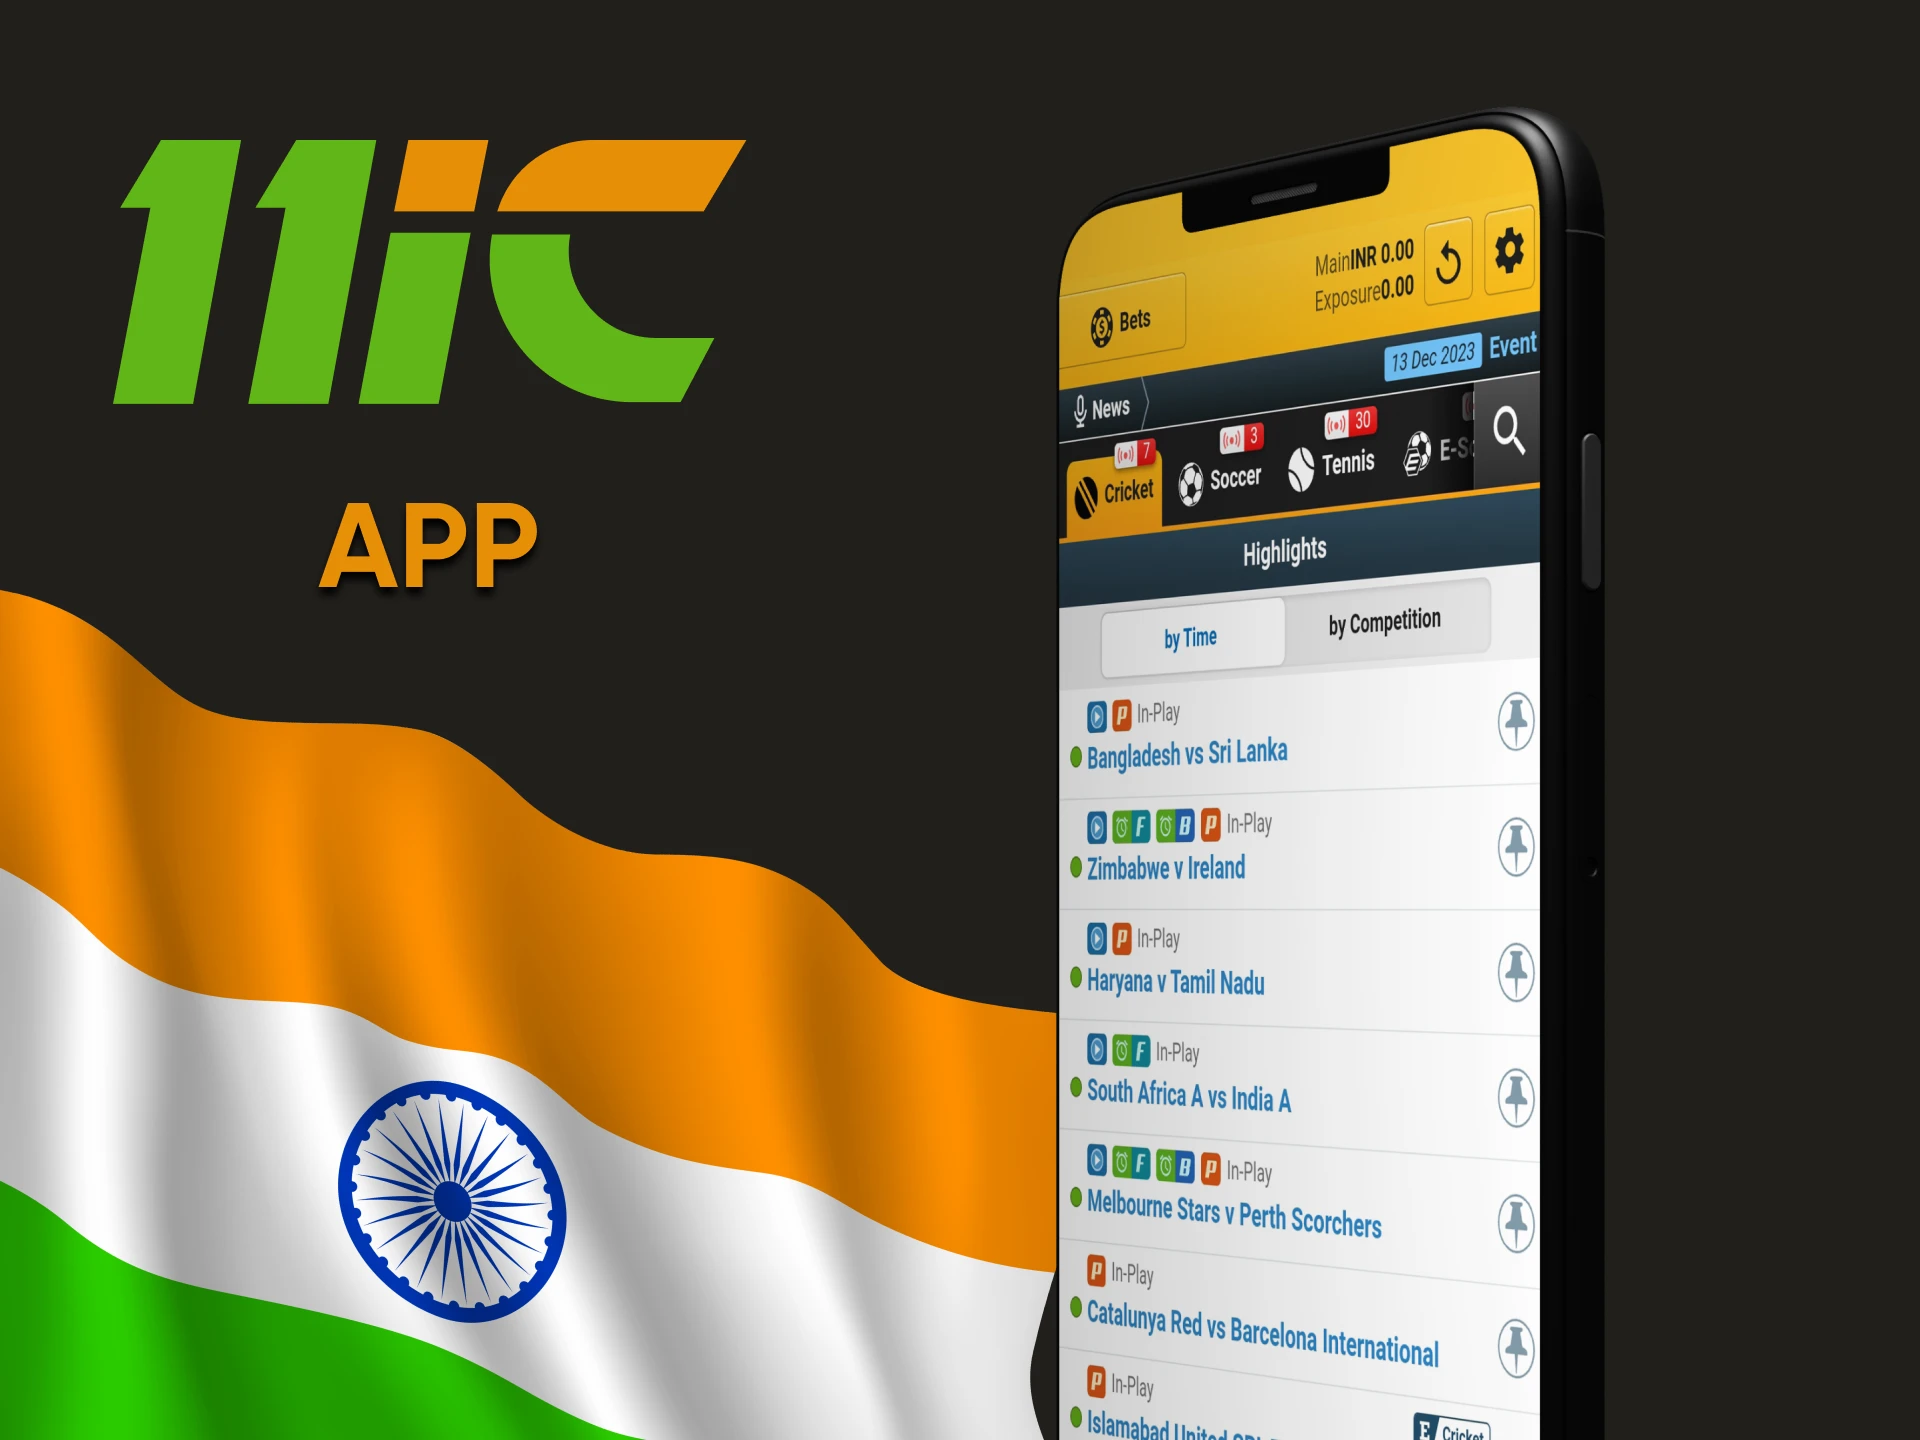 You can place bets on cricket using the 11ic app.